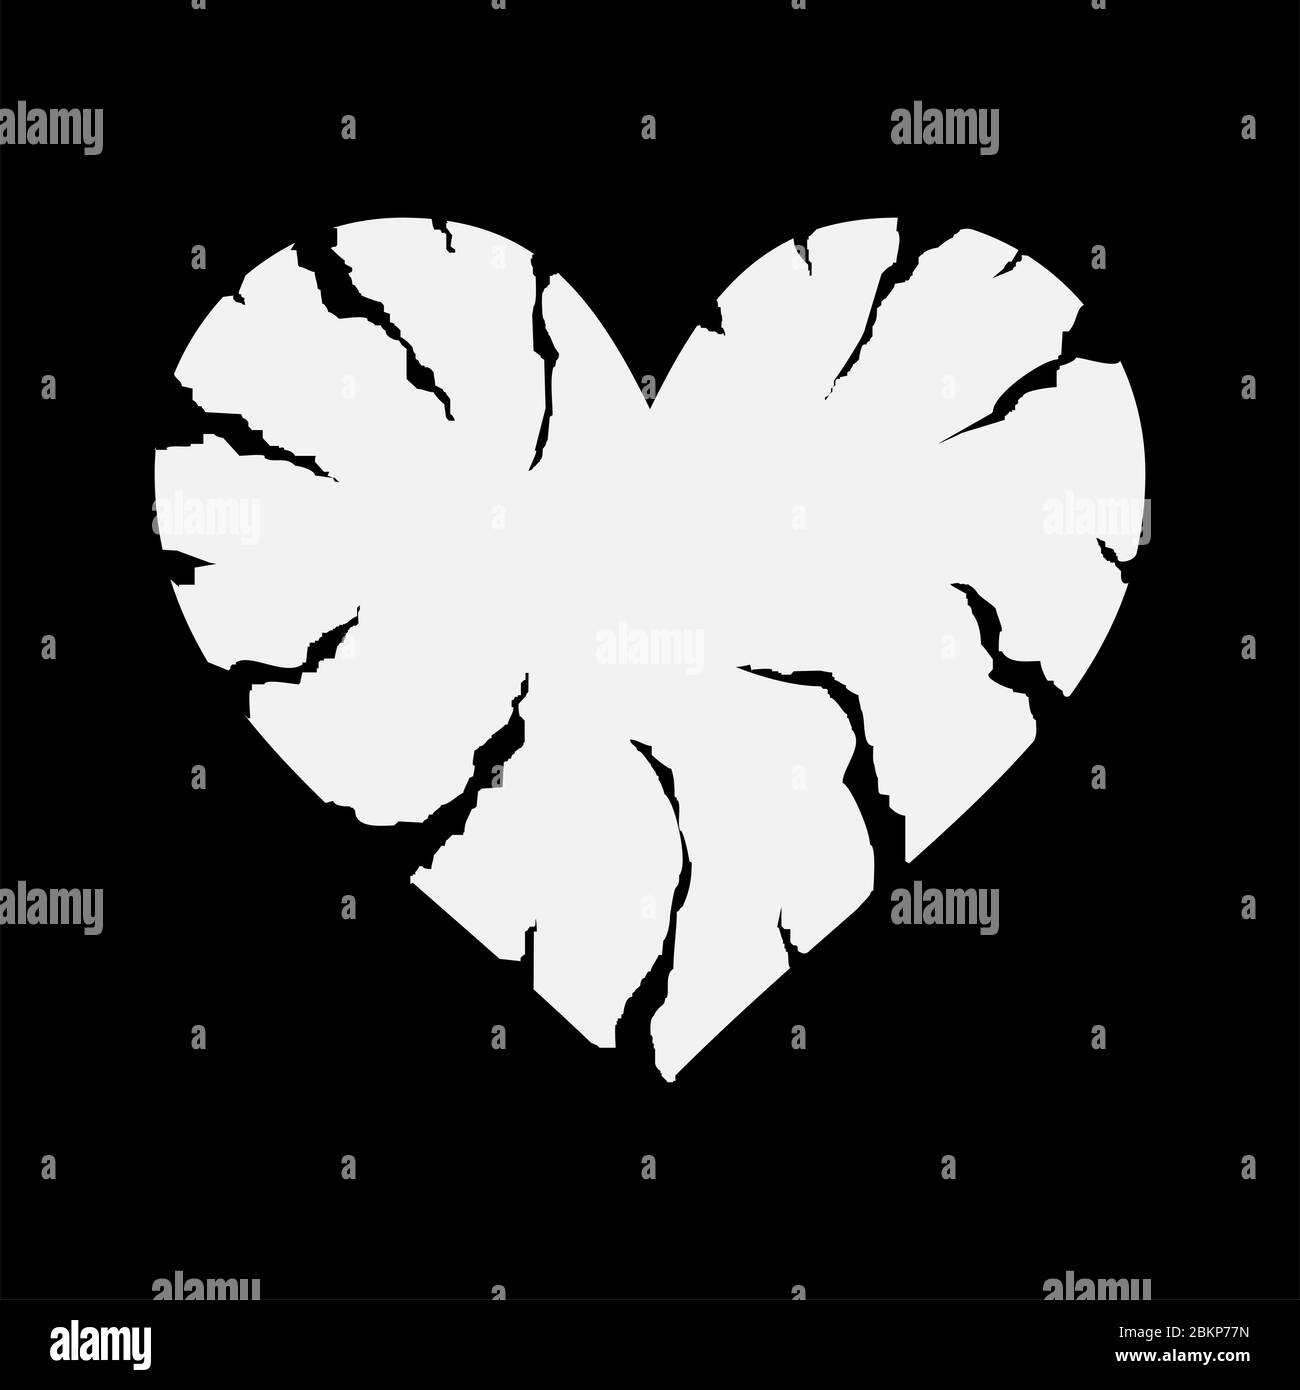 Cracked heart icon on black negative space. Heart shape icon with cracks and ragged edges. Symbol of divorce or mental pain. Unhappy love, emotional e Stock Vector